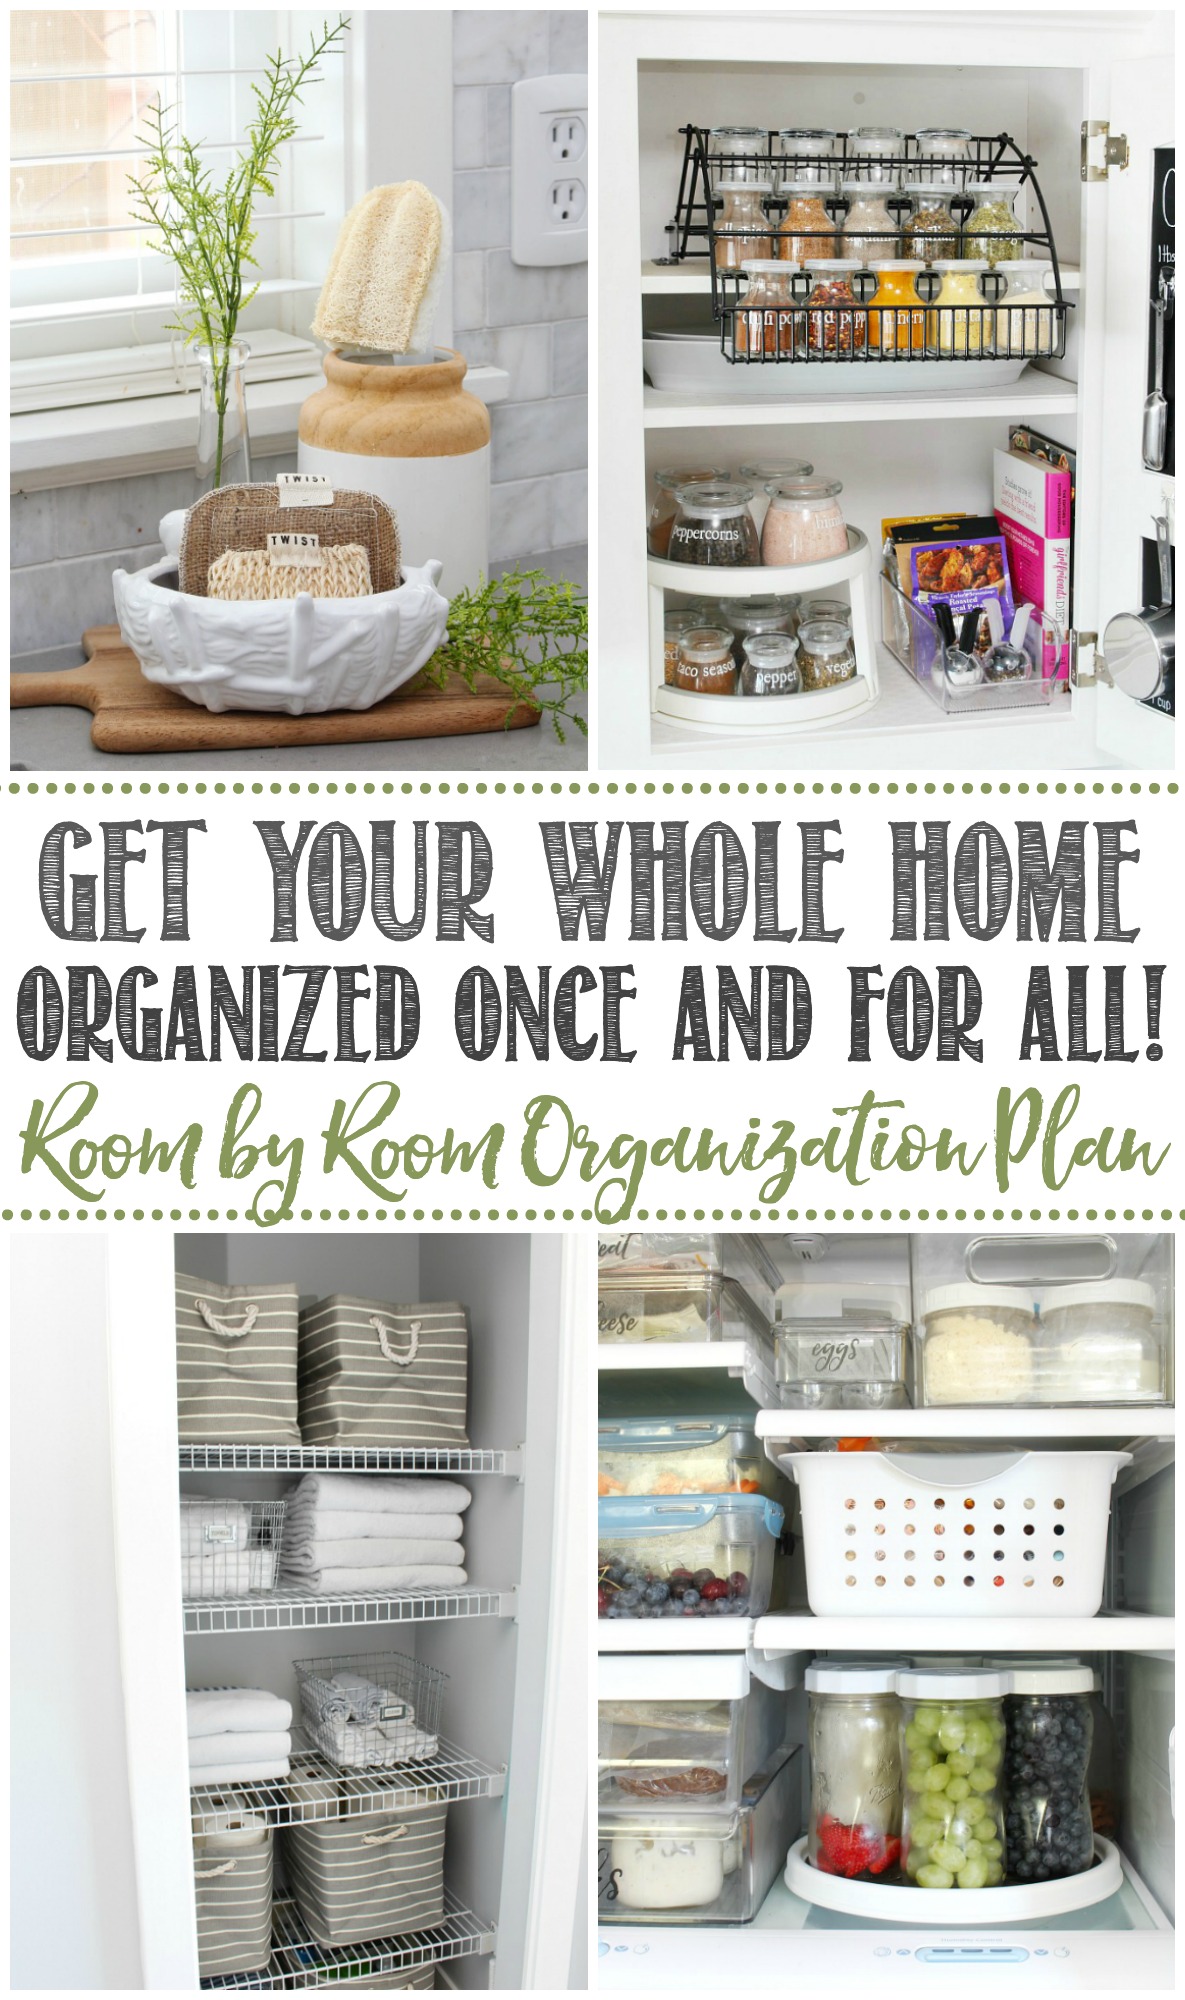 House & Home - 50 Organization Tips For Your Entire House